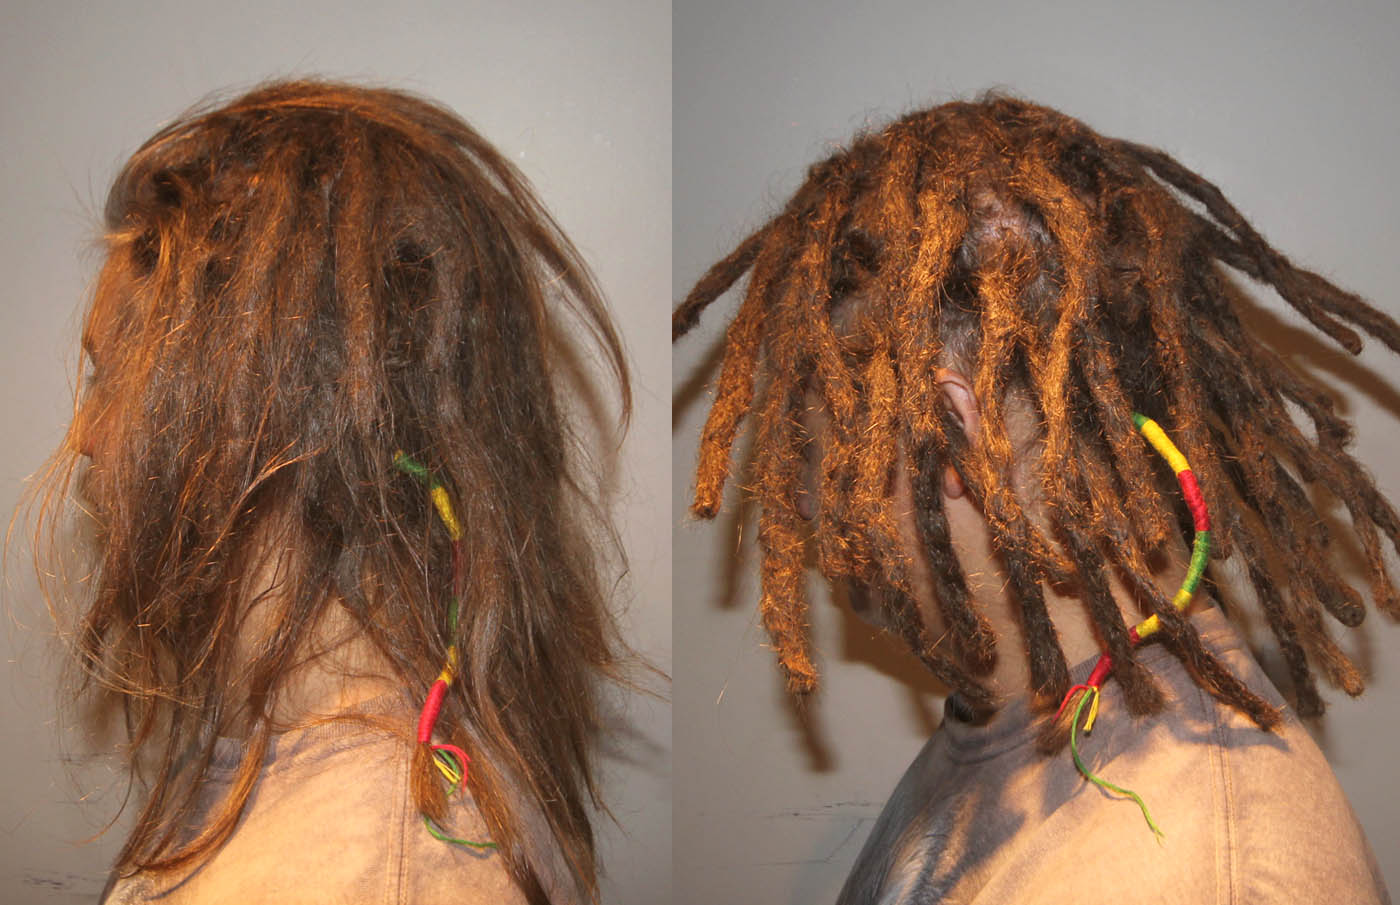 Etienne with dreadlocks, before and after fixed by Dreads MTL.